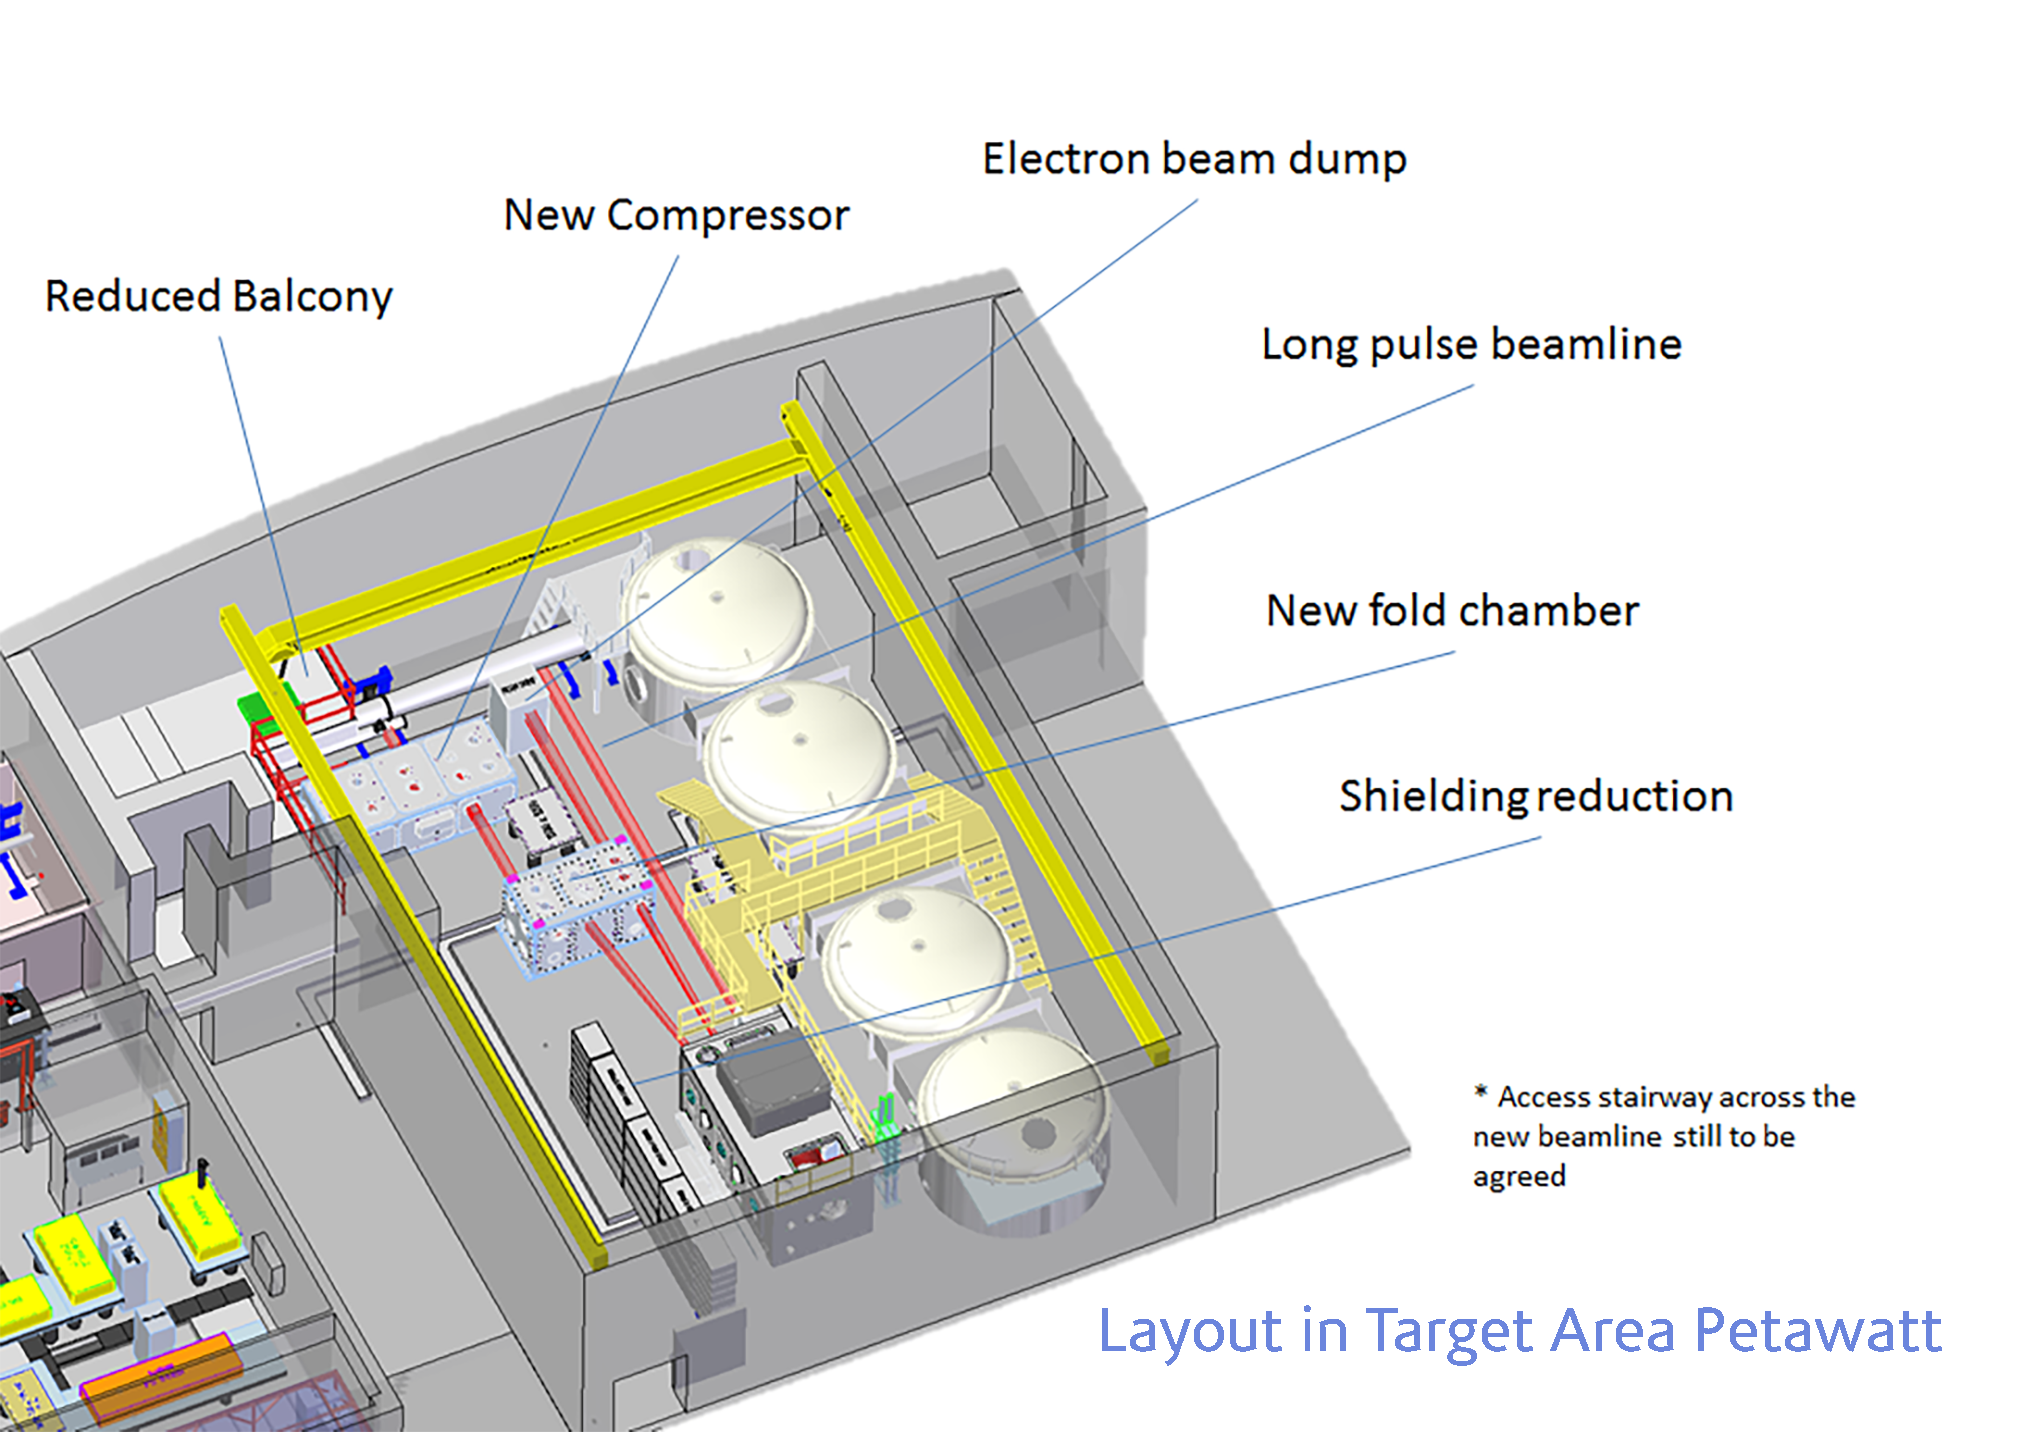 vulcan beamlines project image 3.png